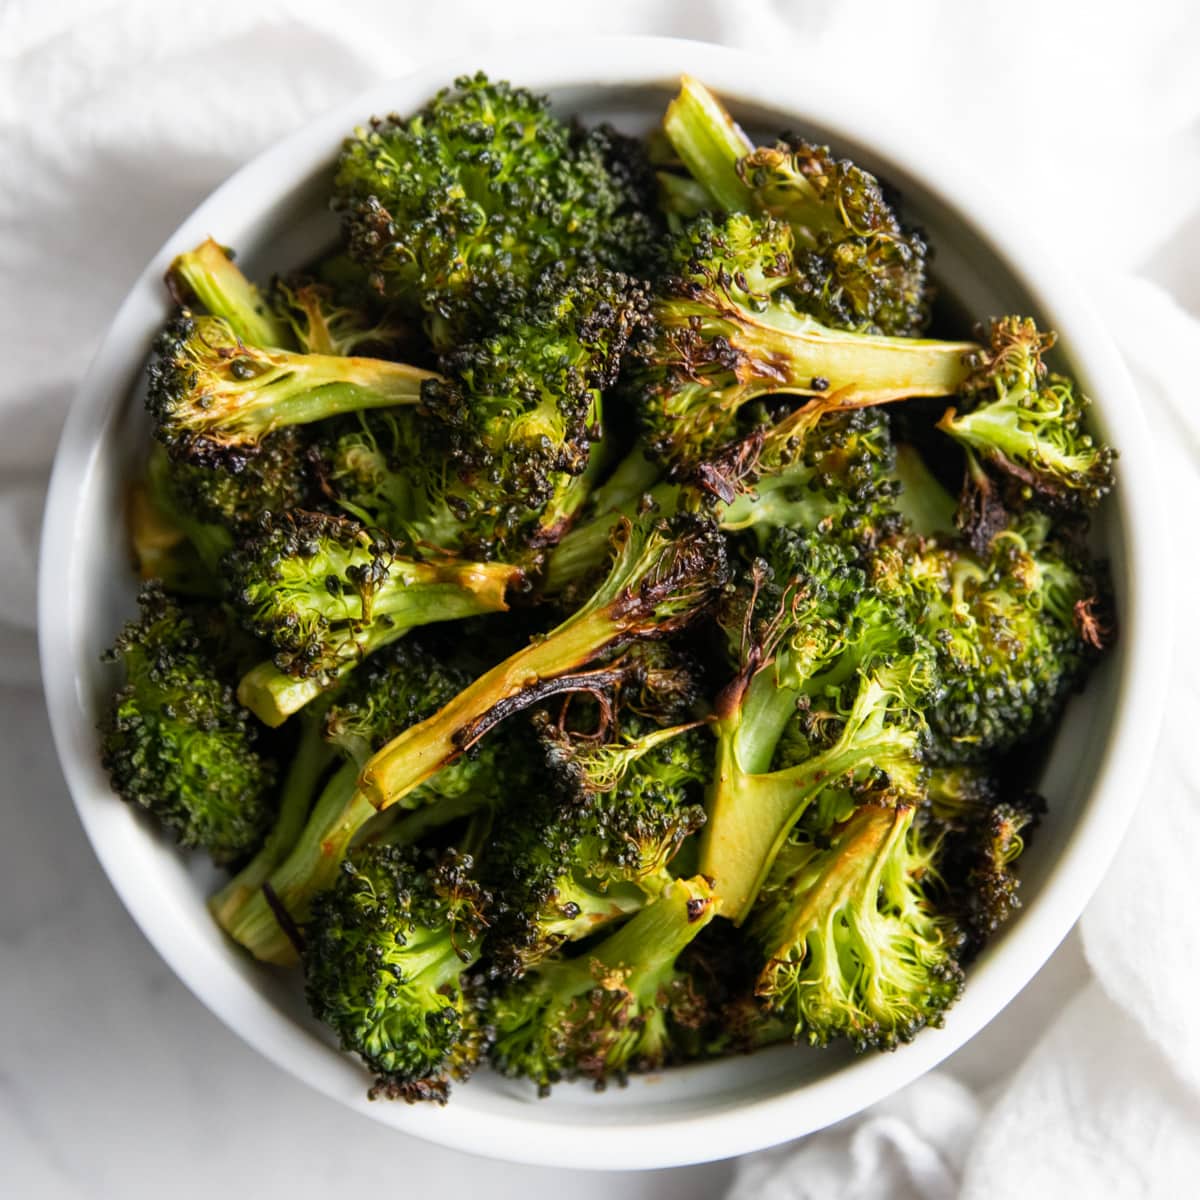 Low FODMAP Spicy Roasted Broccoli - Fun Without FODMAPs